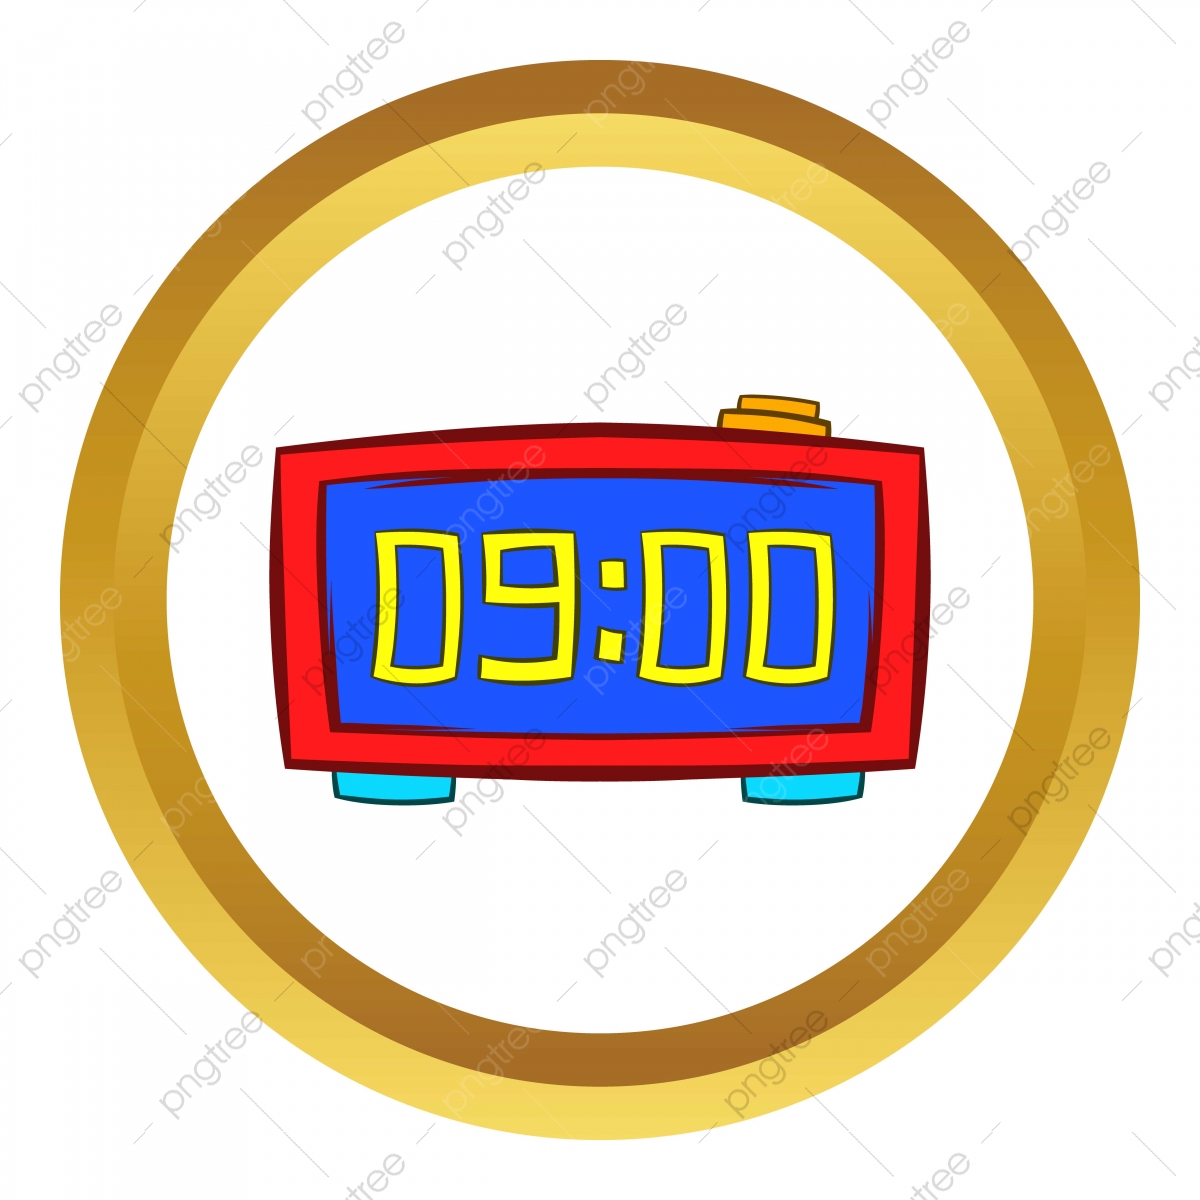 pngtree digital table clock vector icon cartoon style png image